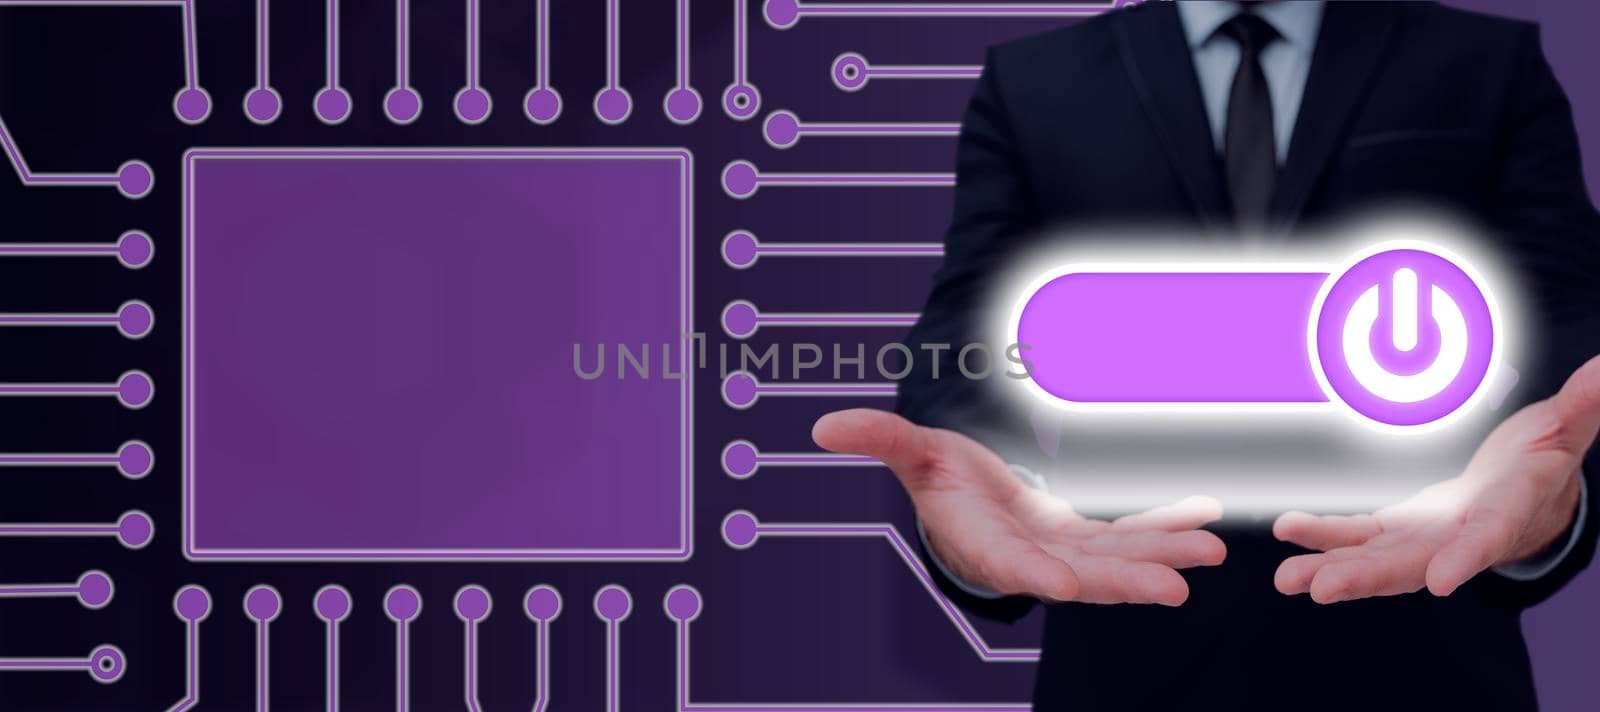 Businessman With Two Hands Presenting Power Button Symbol And Displaying Crucial Messages In A Futuristic Design. Man In A Suit Receiving Business Ideas And Information. by nialowwa